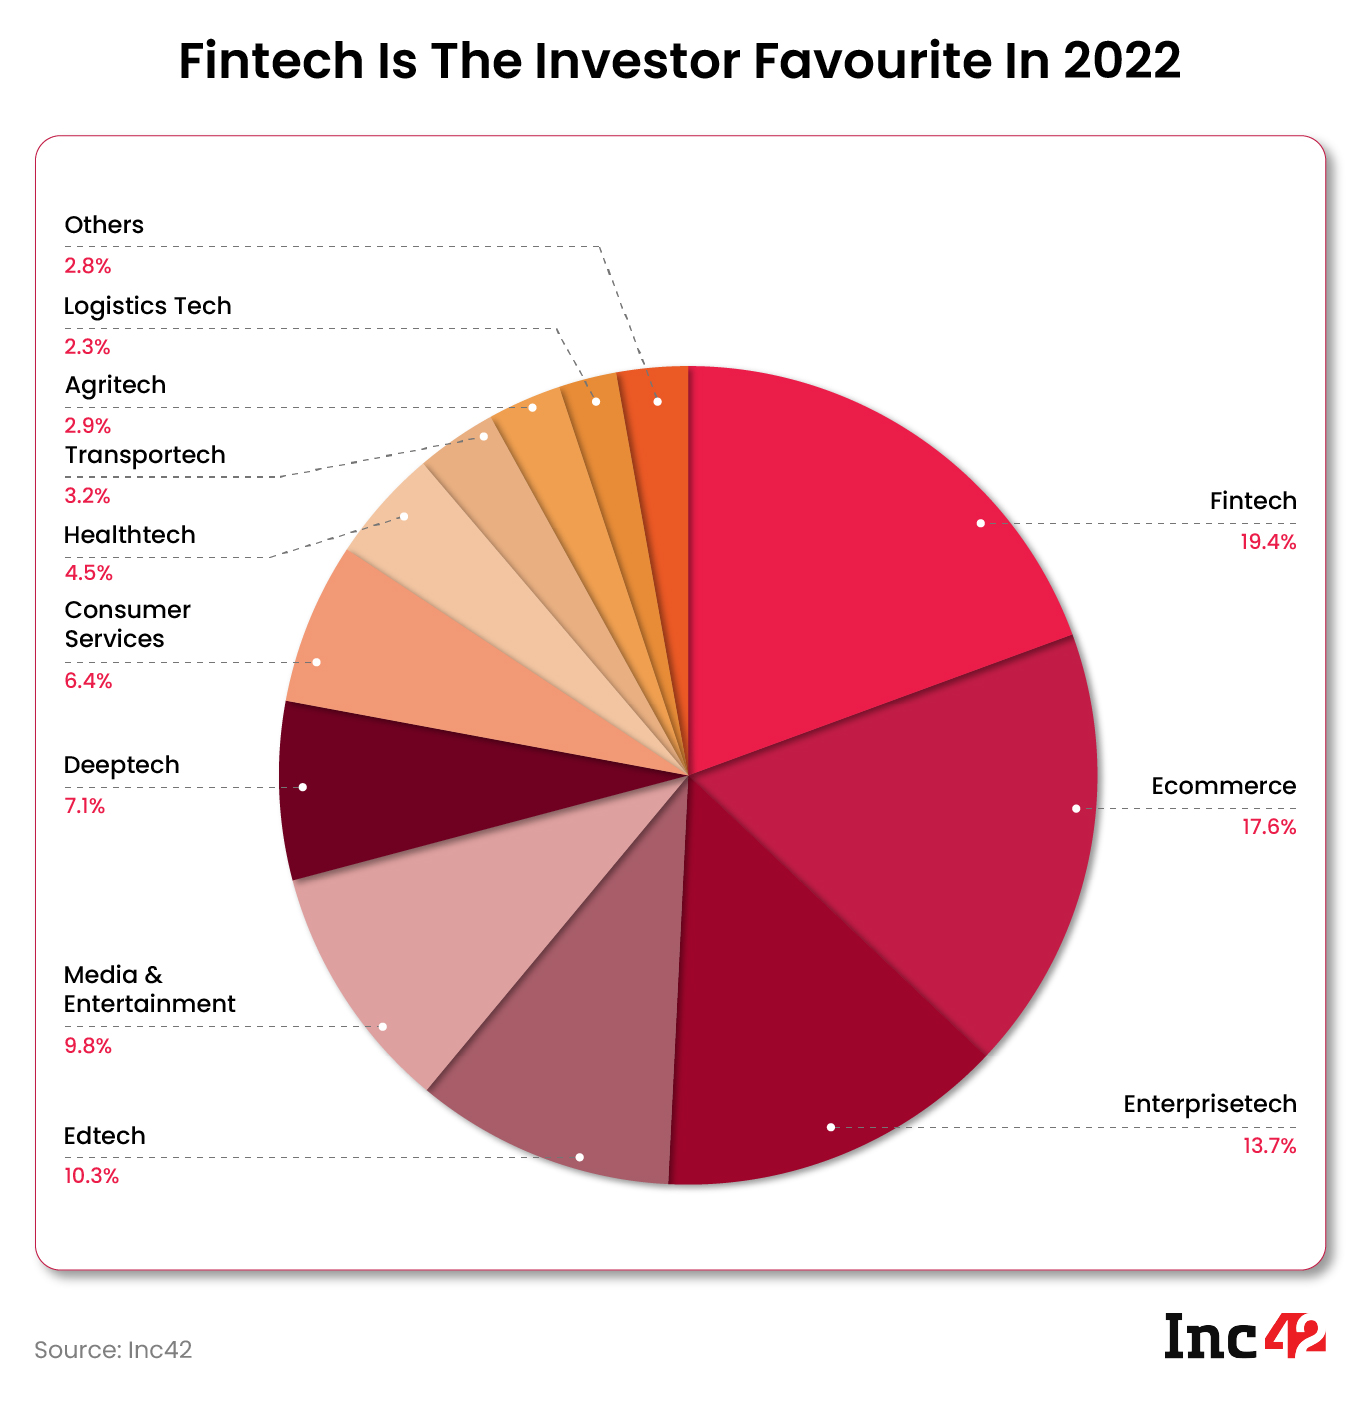 fintech remained the investor favourite in 2022